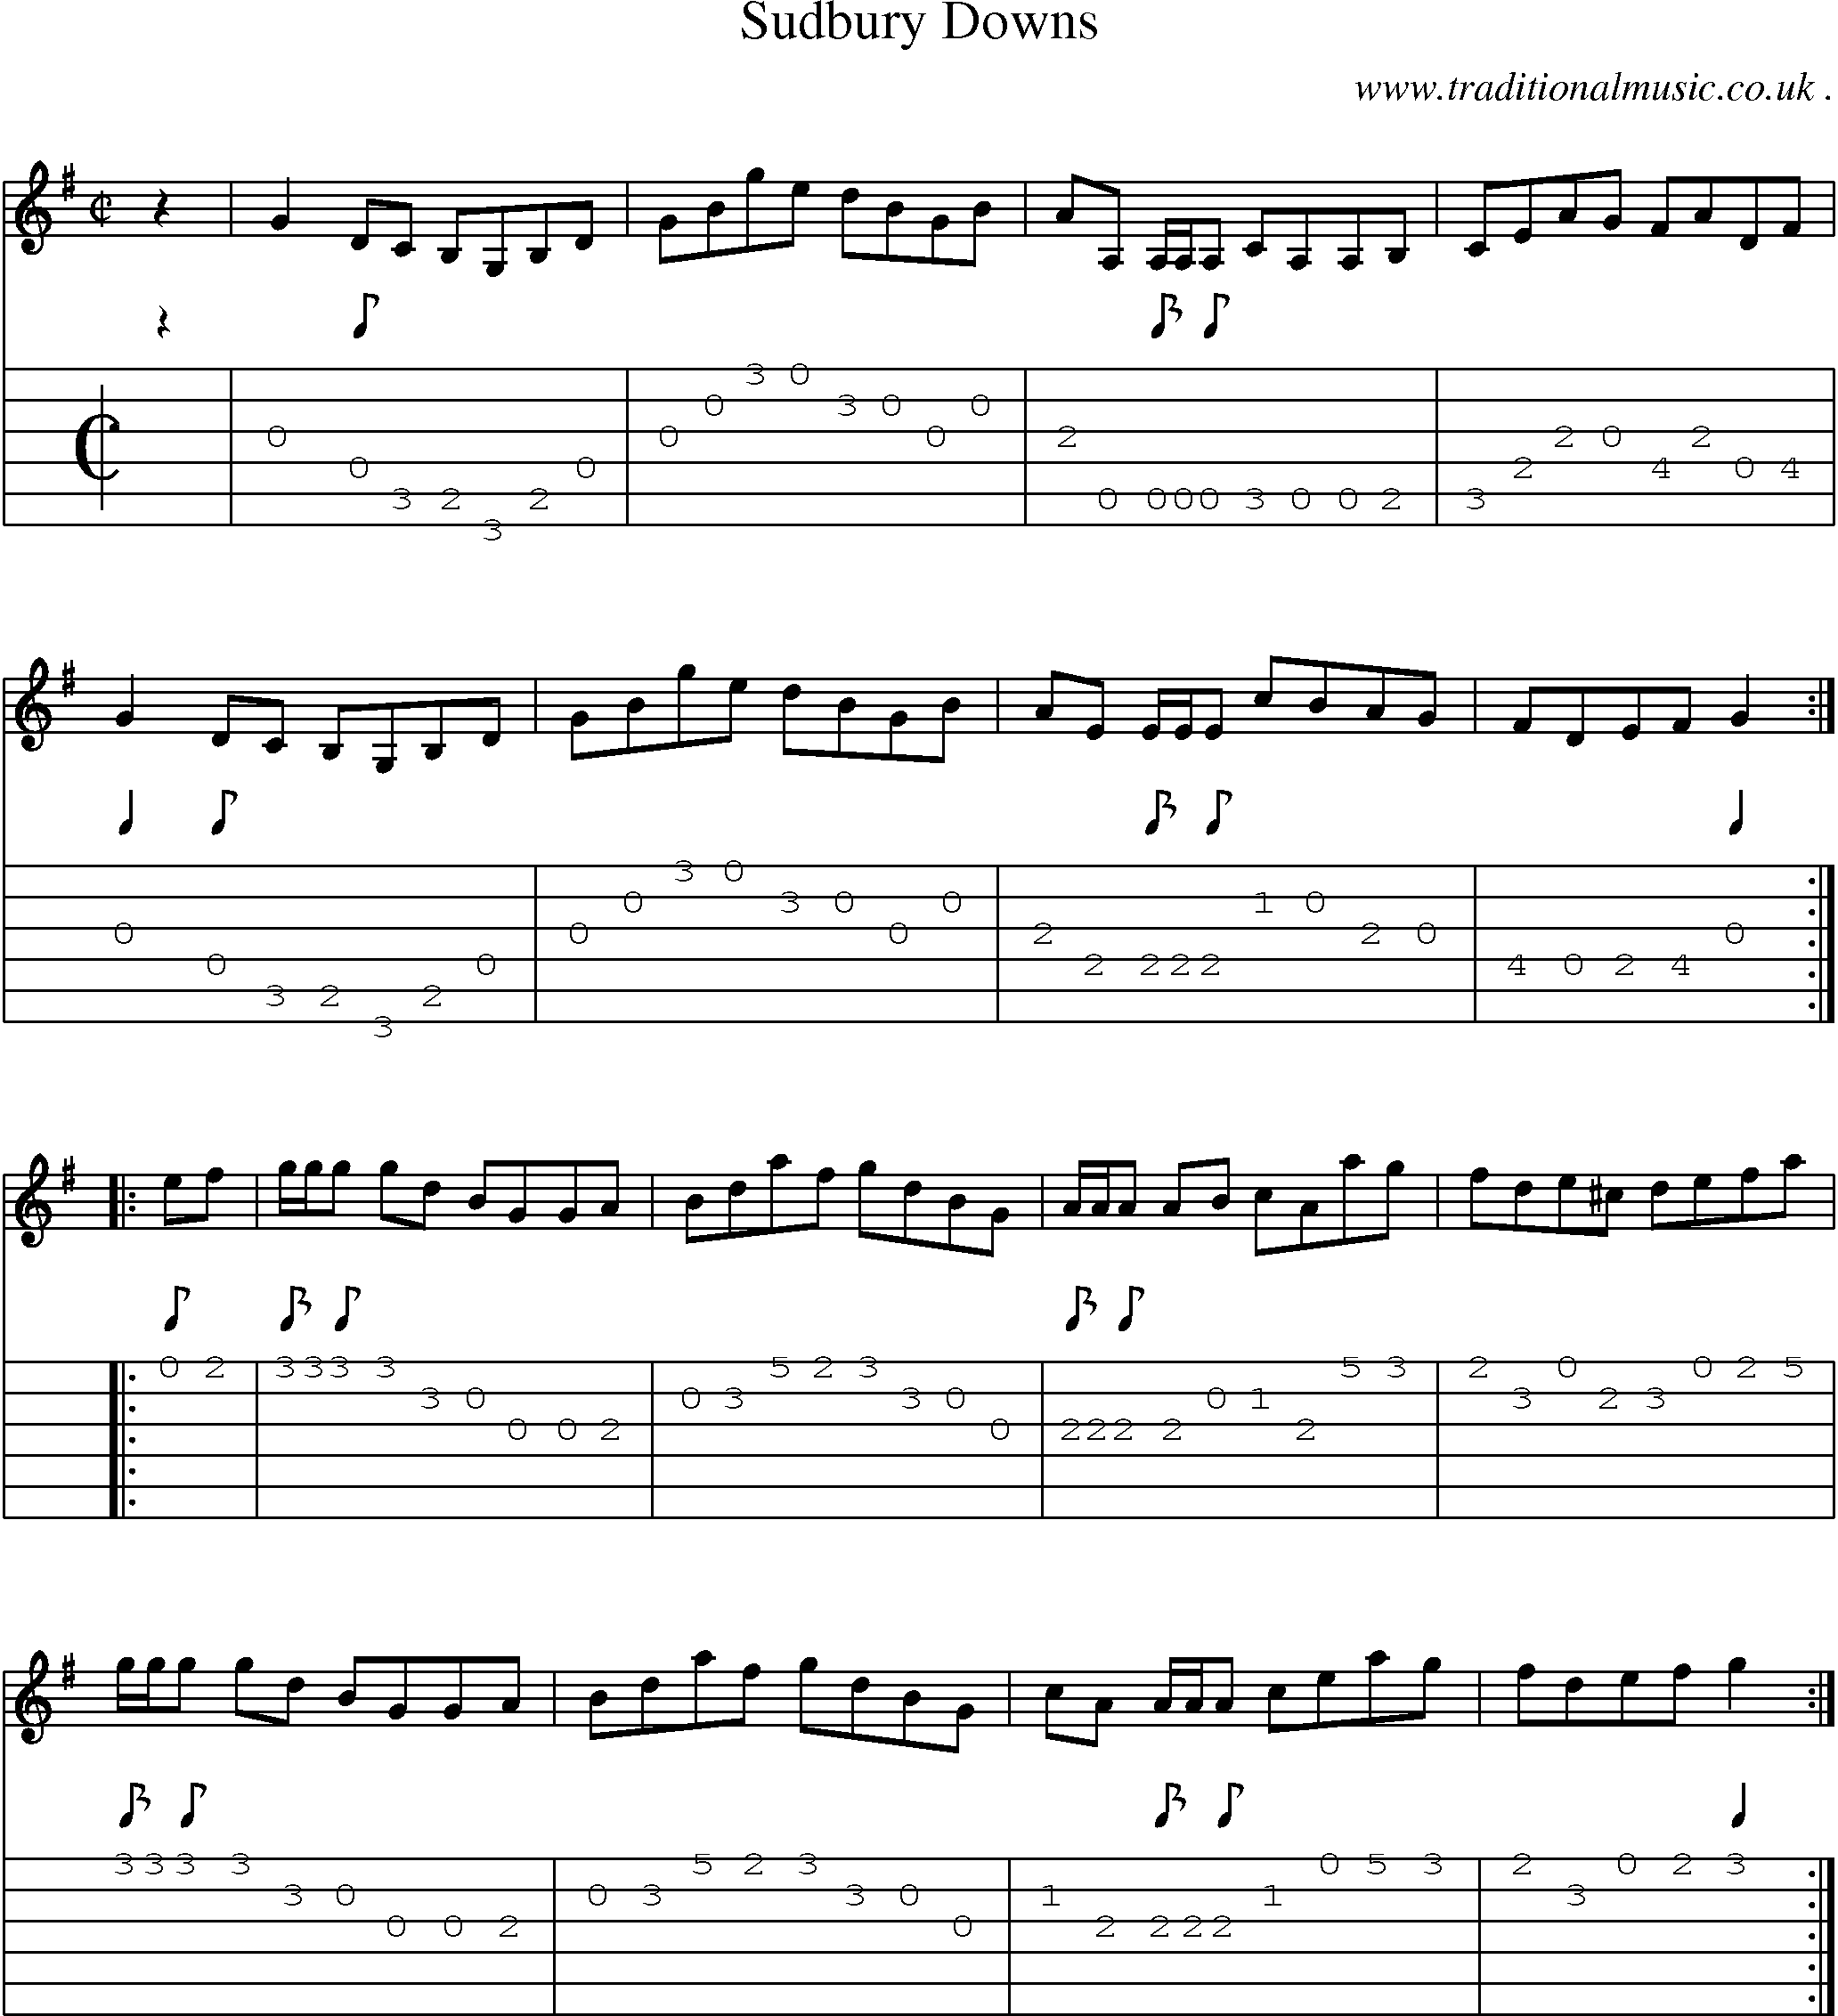 Sheet-Music and Guitar Tabs for Sudbury Downs